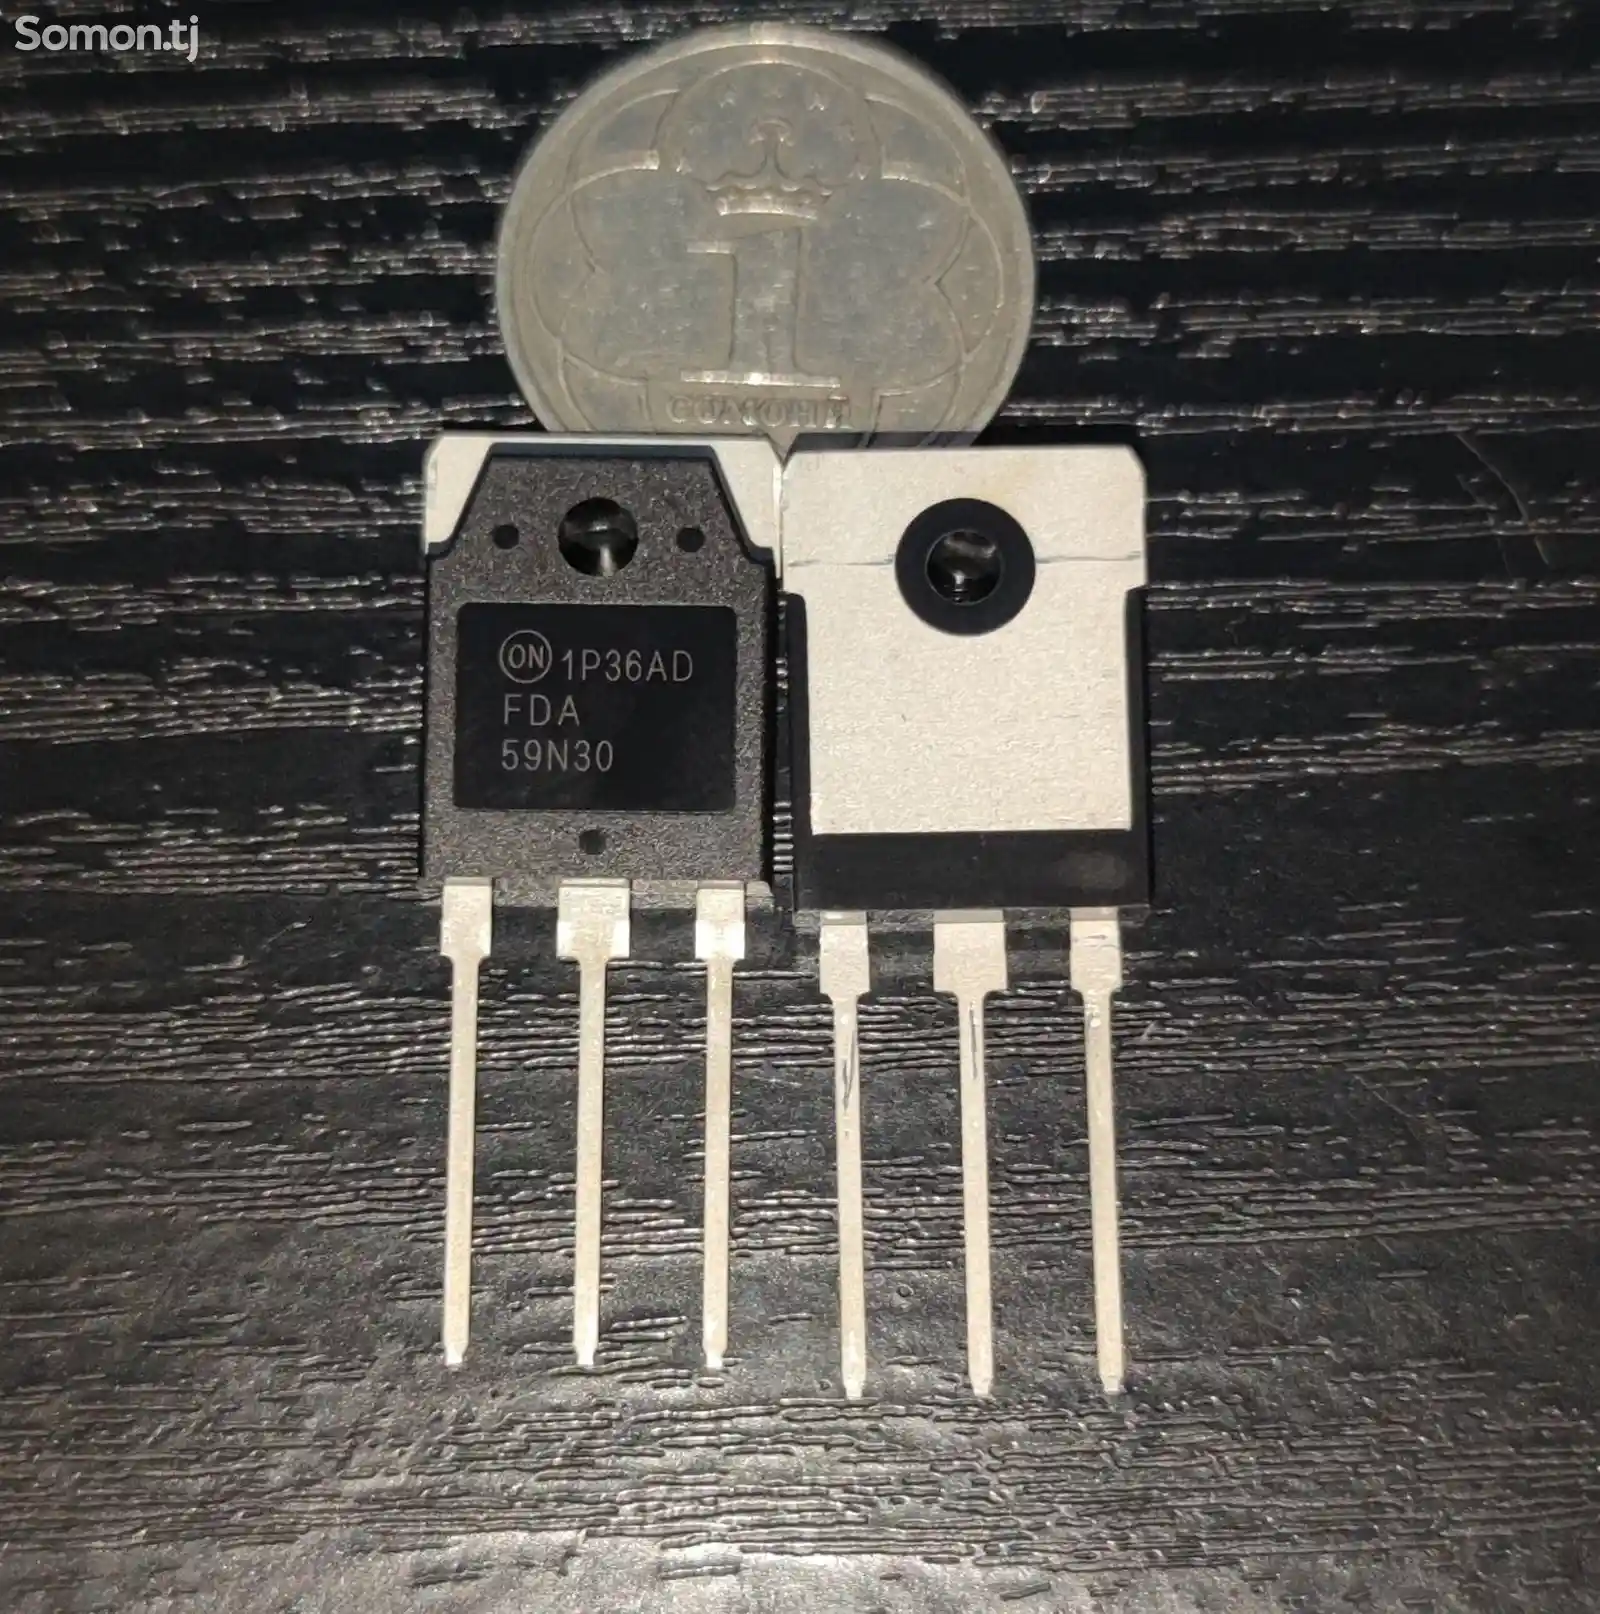 Mosfet транзистор FDA59N30, N-channel, 300V, 59A, TO-3PN